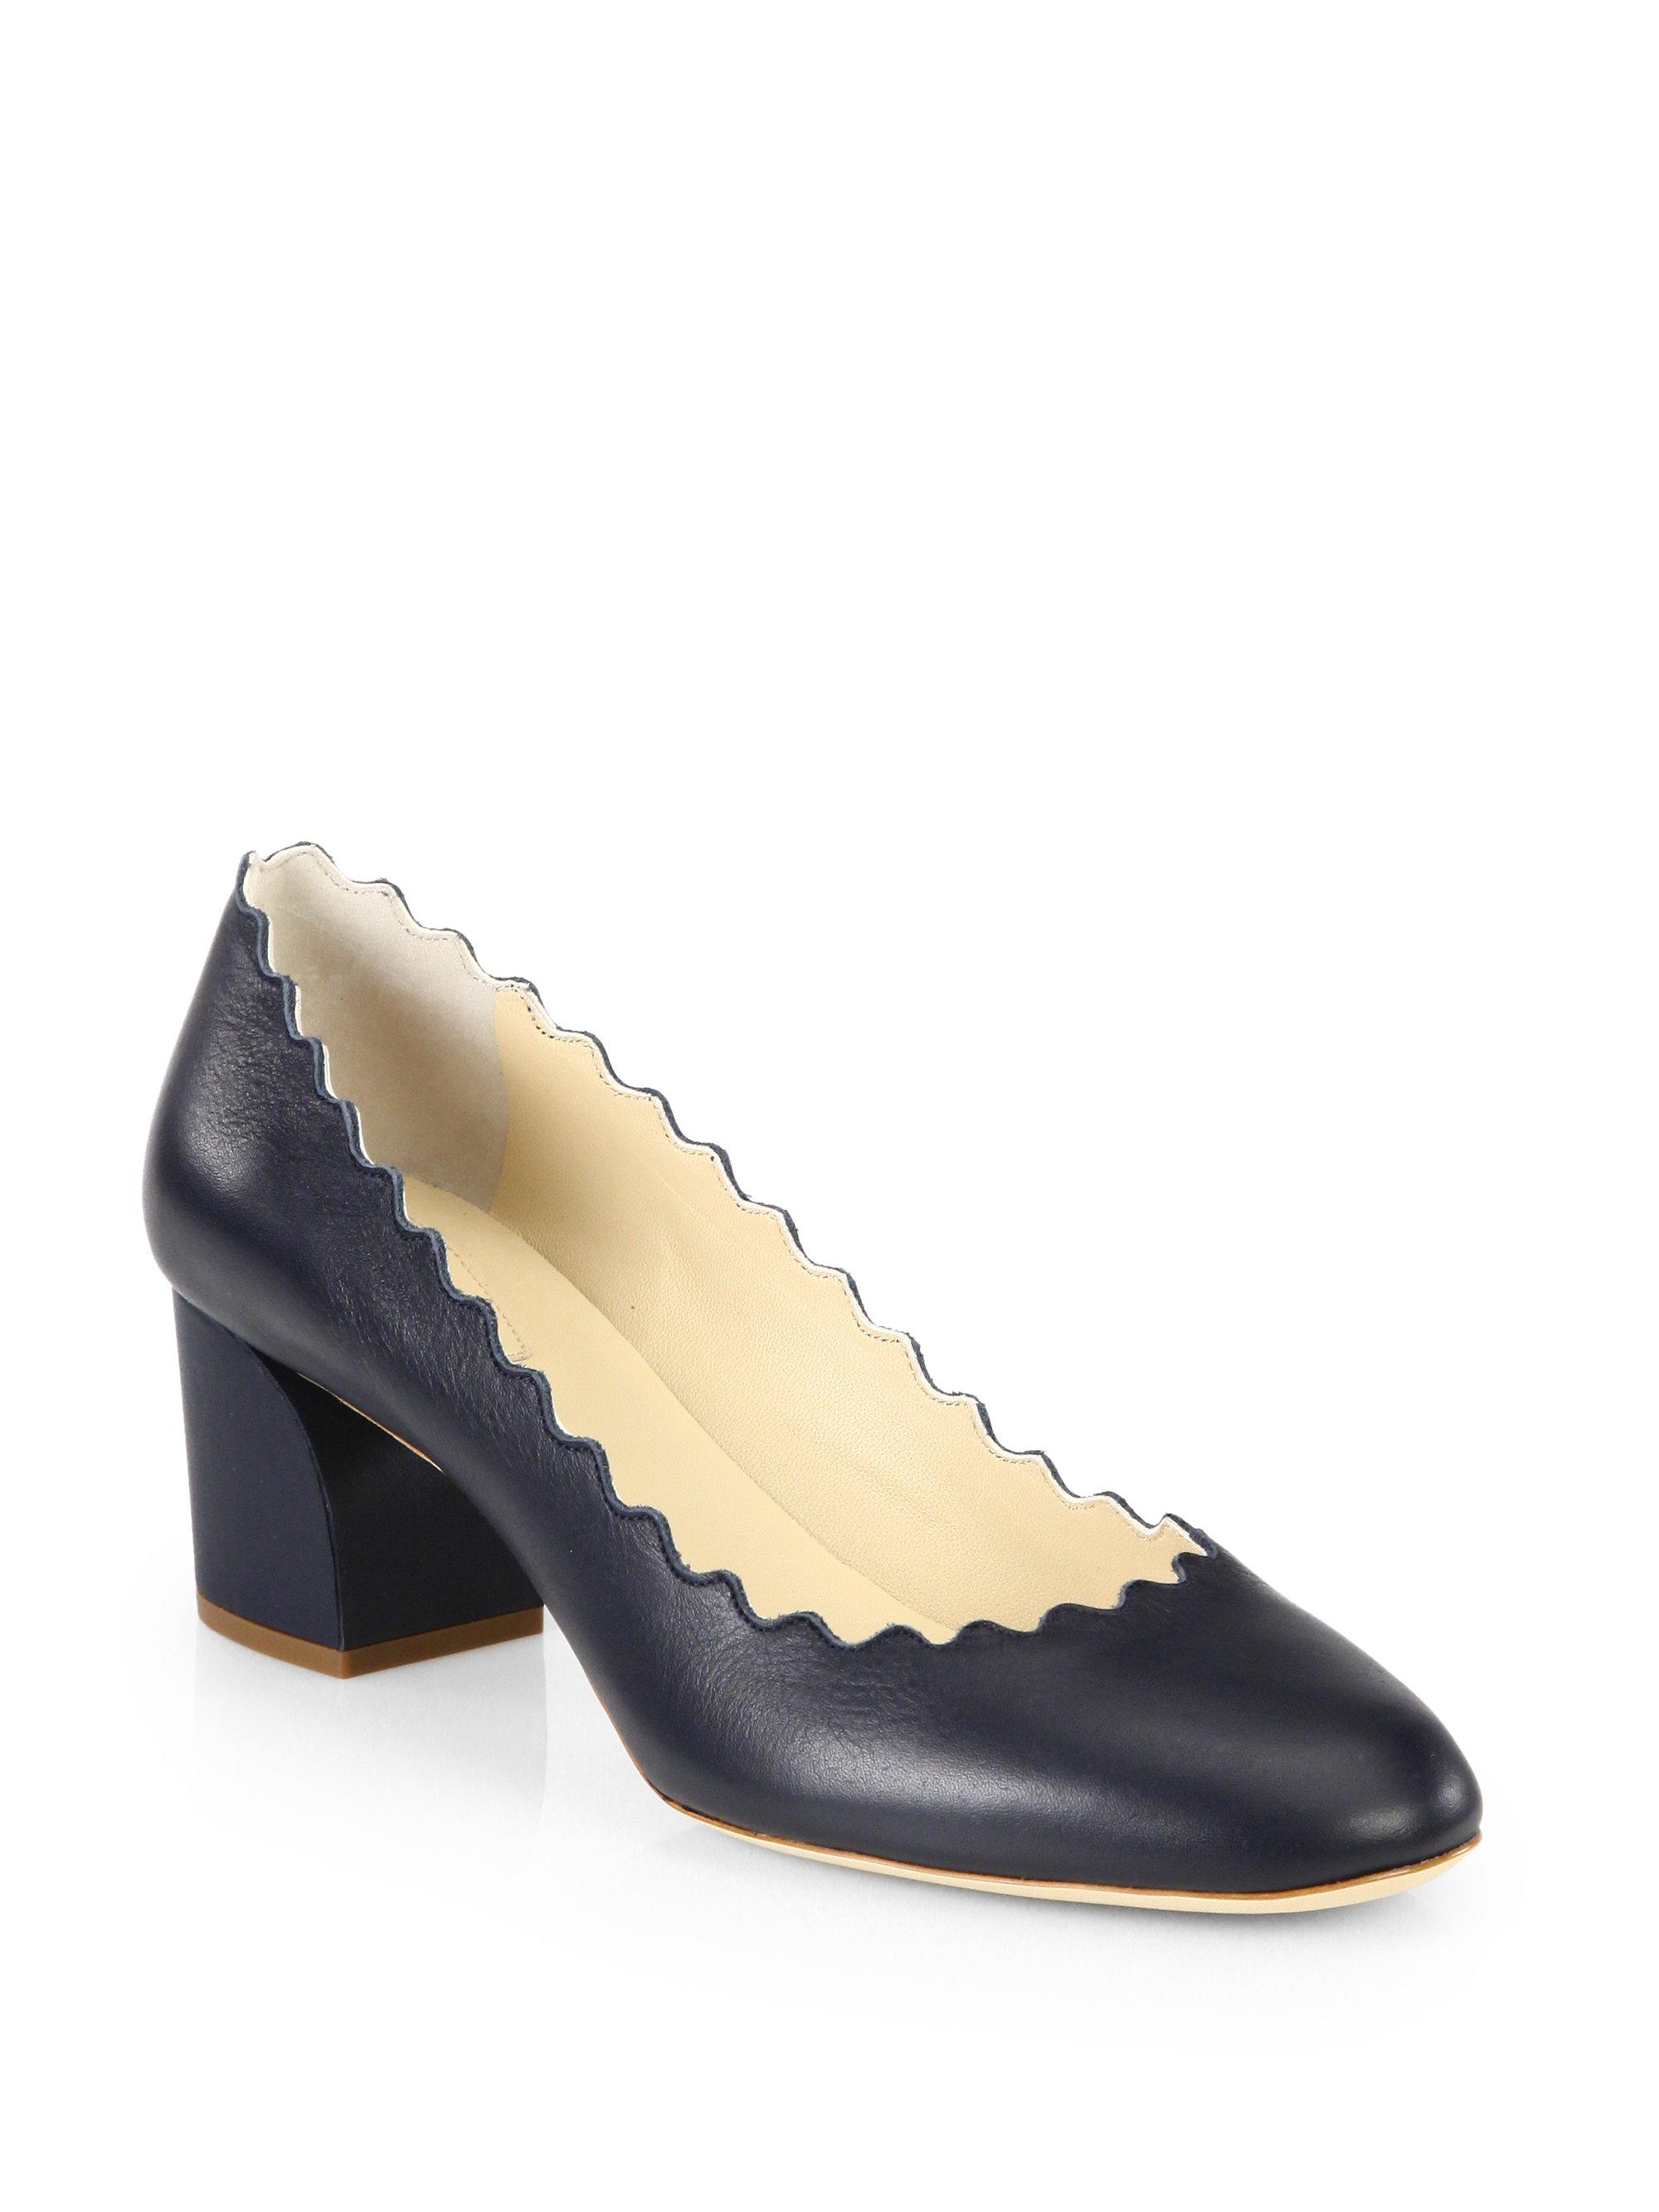 Chloé Scalloped Leather Pumps in Blue | Lyst